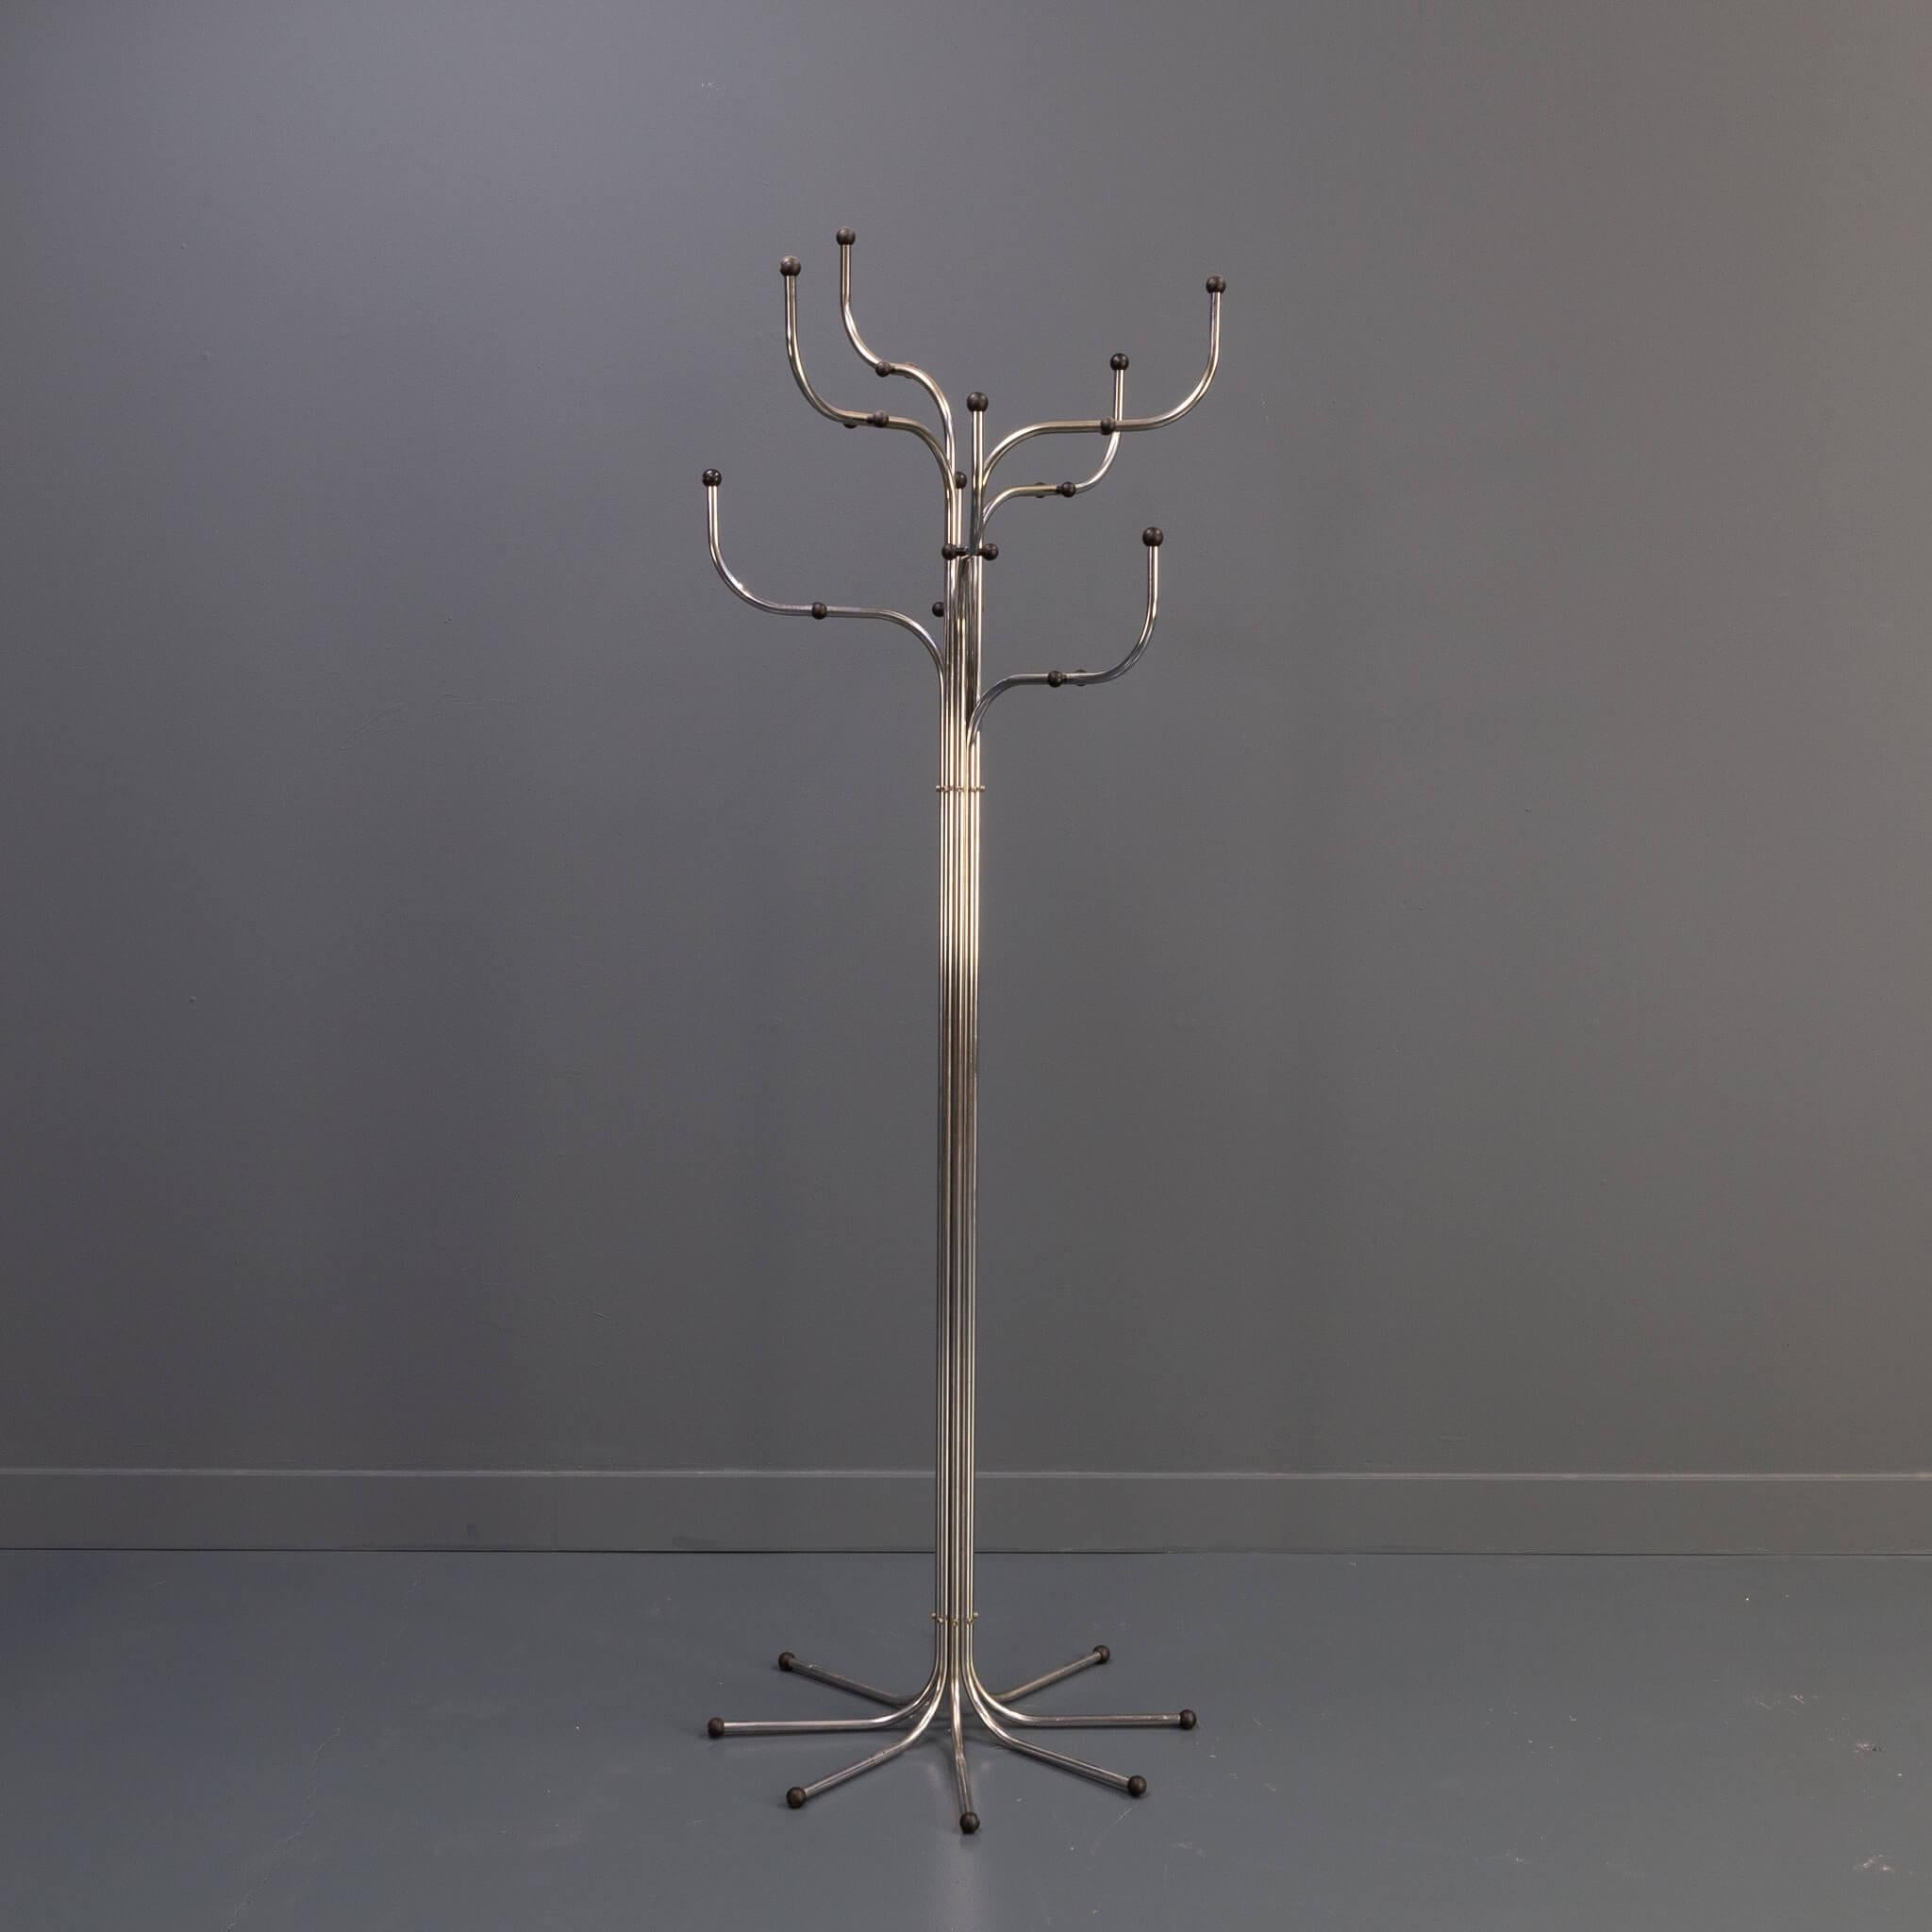 The ‘tree’ Coat rack was designed by Sidse Werner for manufacturer Fritz Hansen, one of the best known and oldest Scandinavian design brands.